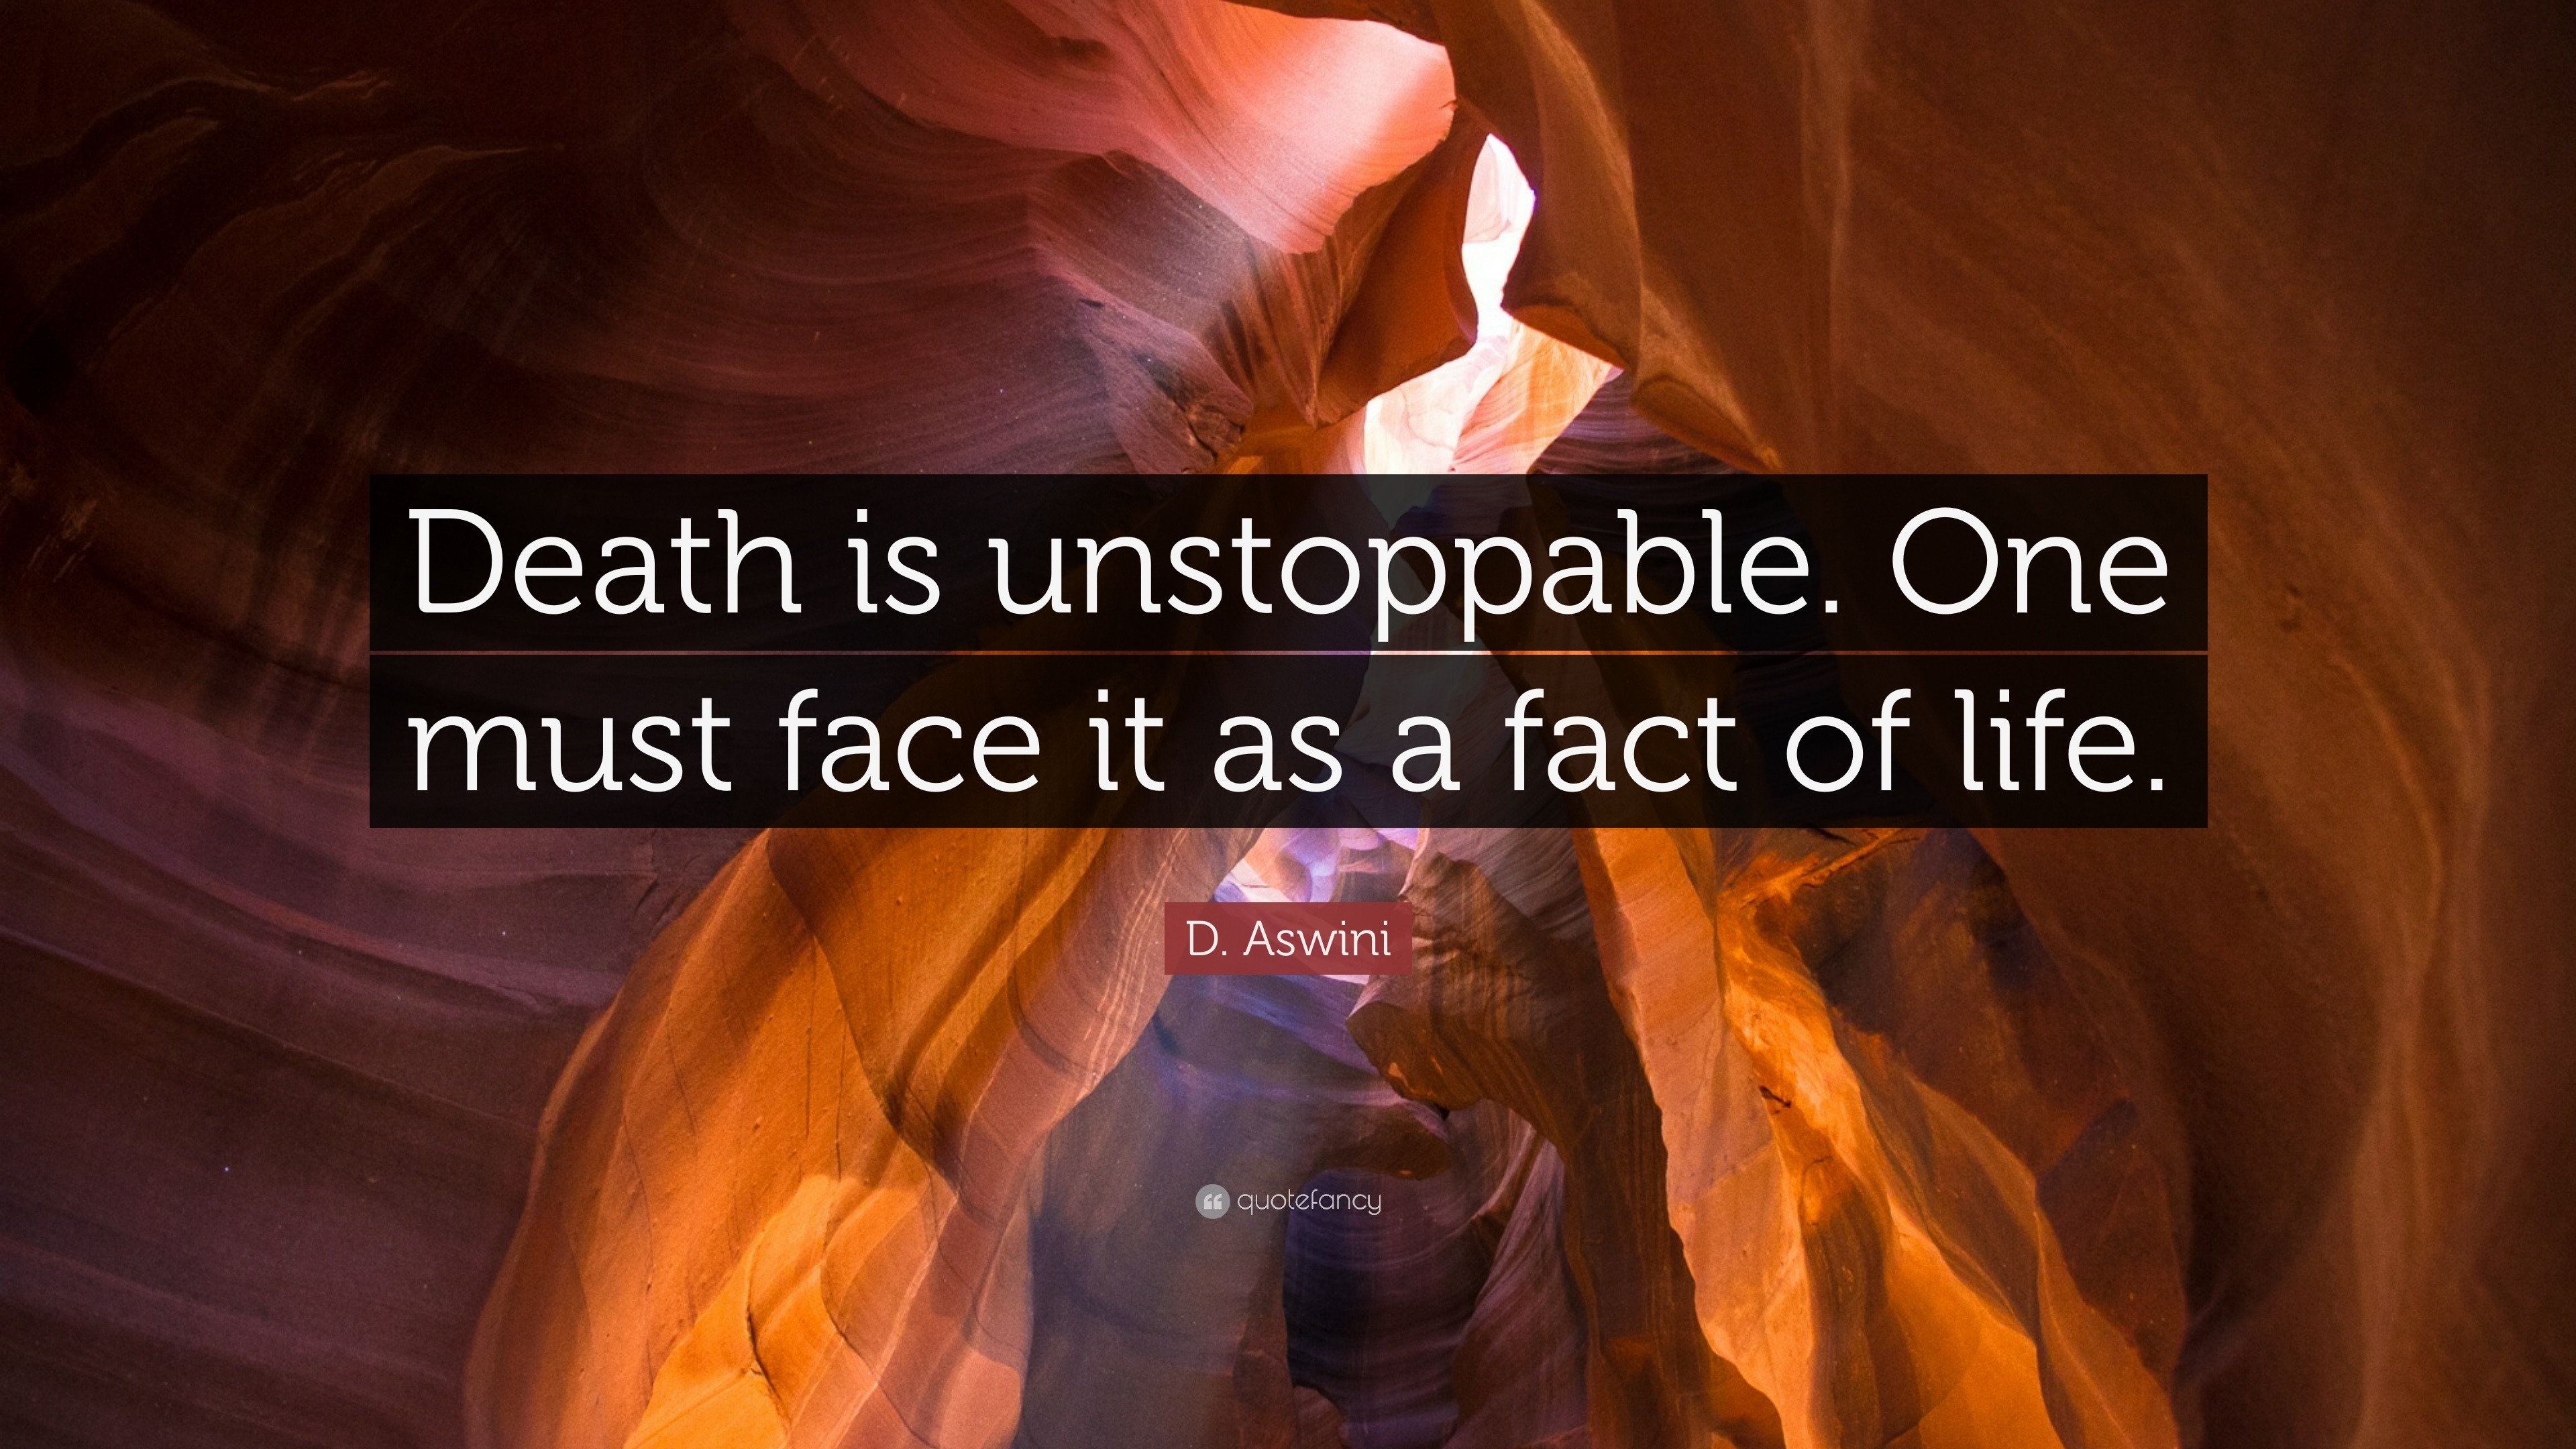 D. Aswini Quote: “Death is unstoppable. One must face it as a fact